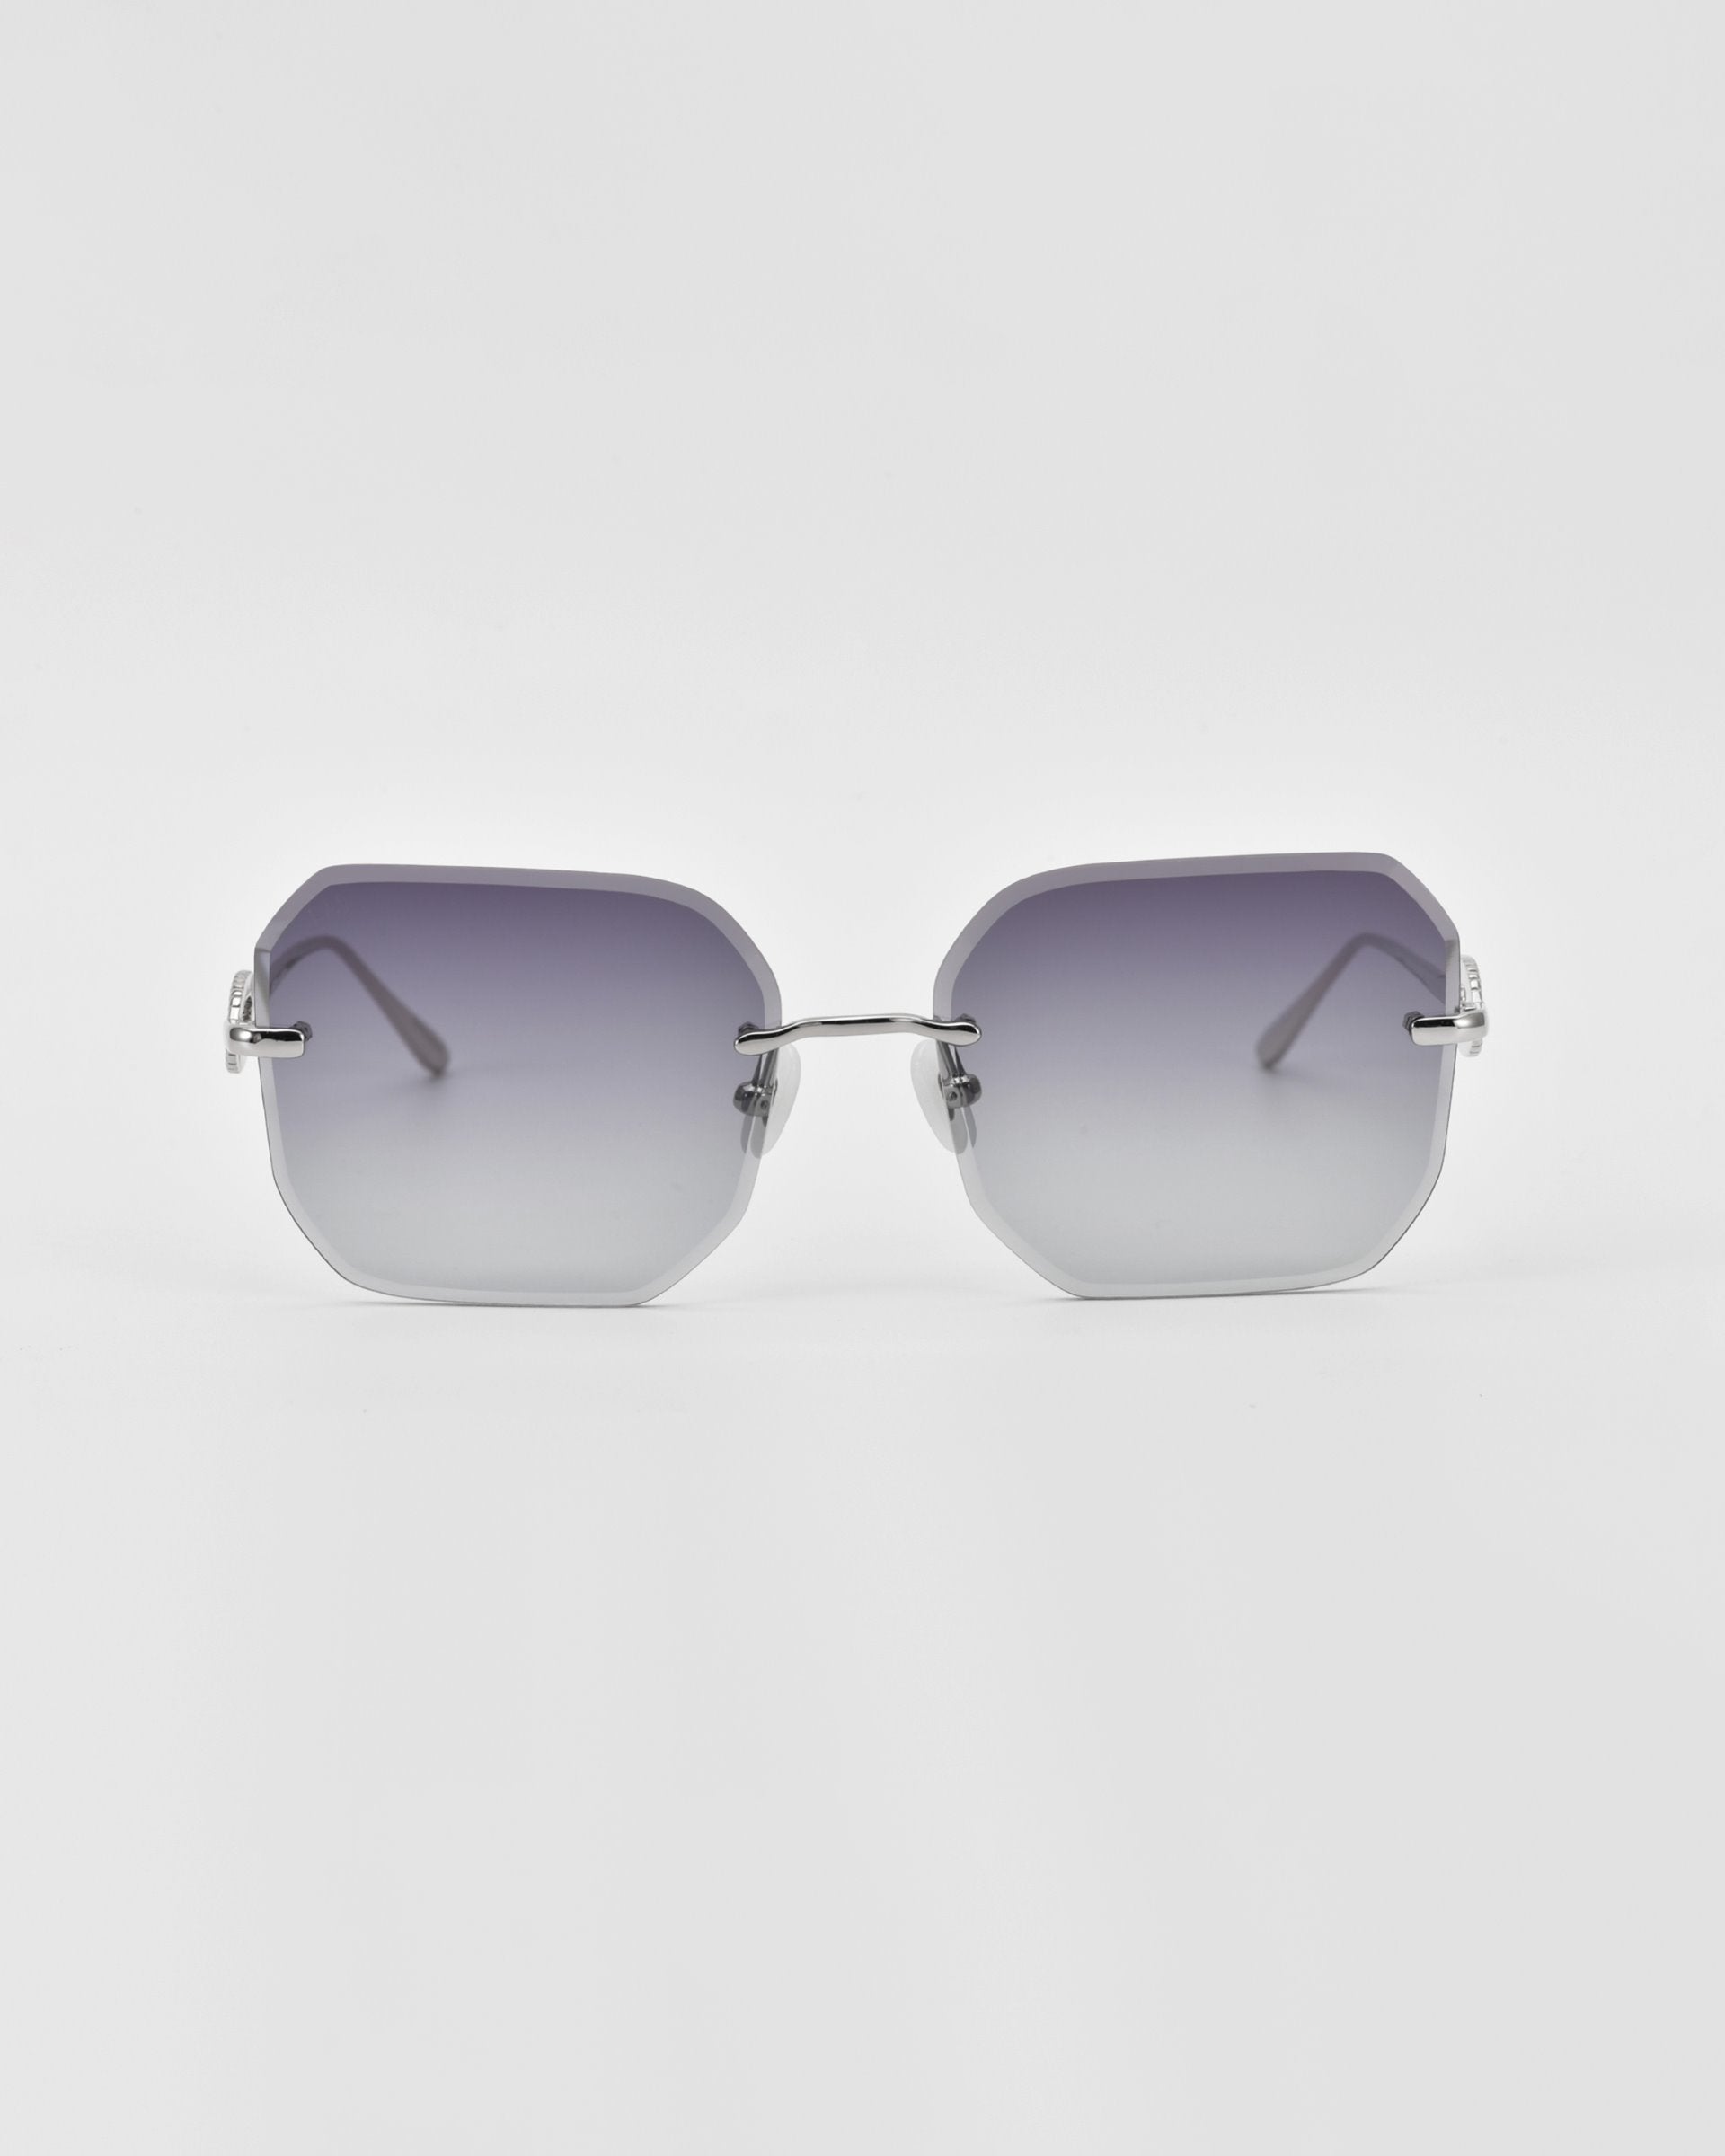 A pair of For Art&#39;s Sake® Aria rimless sunglasses with gradient lenses transitioning from dark gray at the top to light gray at the bottom. The sunglasses have thin, silver-tone metal arms and lack any visible jade-stone nose pads or additional frame components. The background is white.